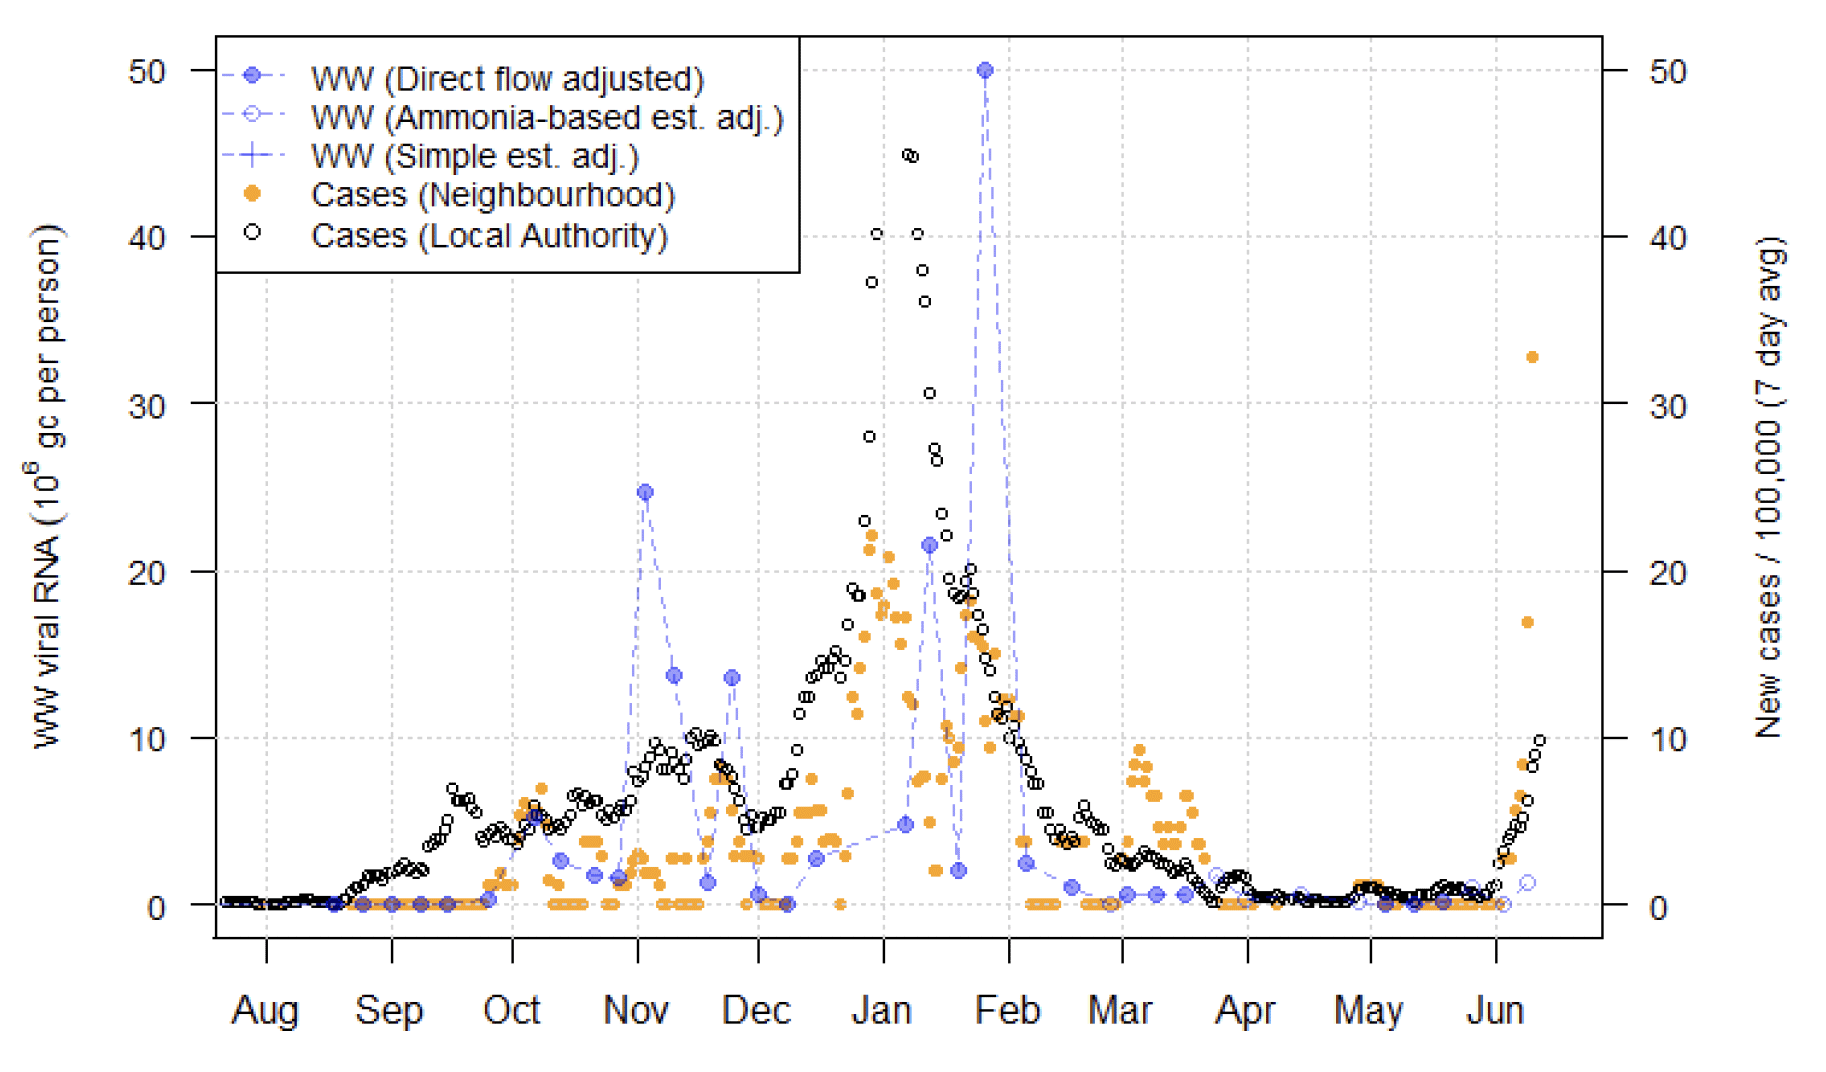 Figure 17. A line chart showing average trends in wastewater Covid-19 and daily case rates for Galashiels in Scottish Borders.